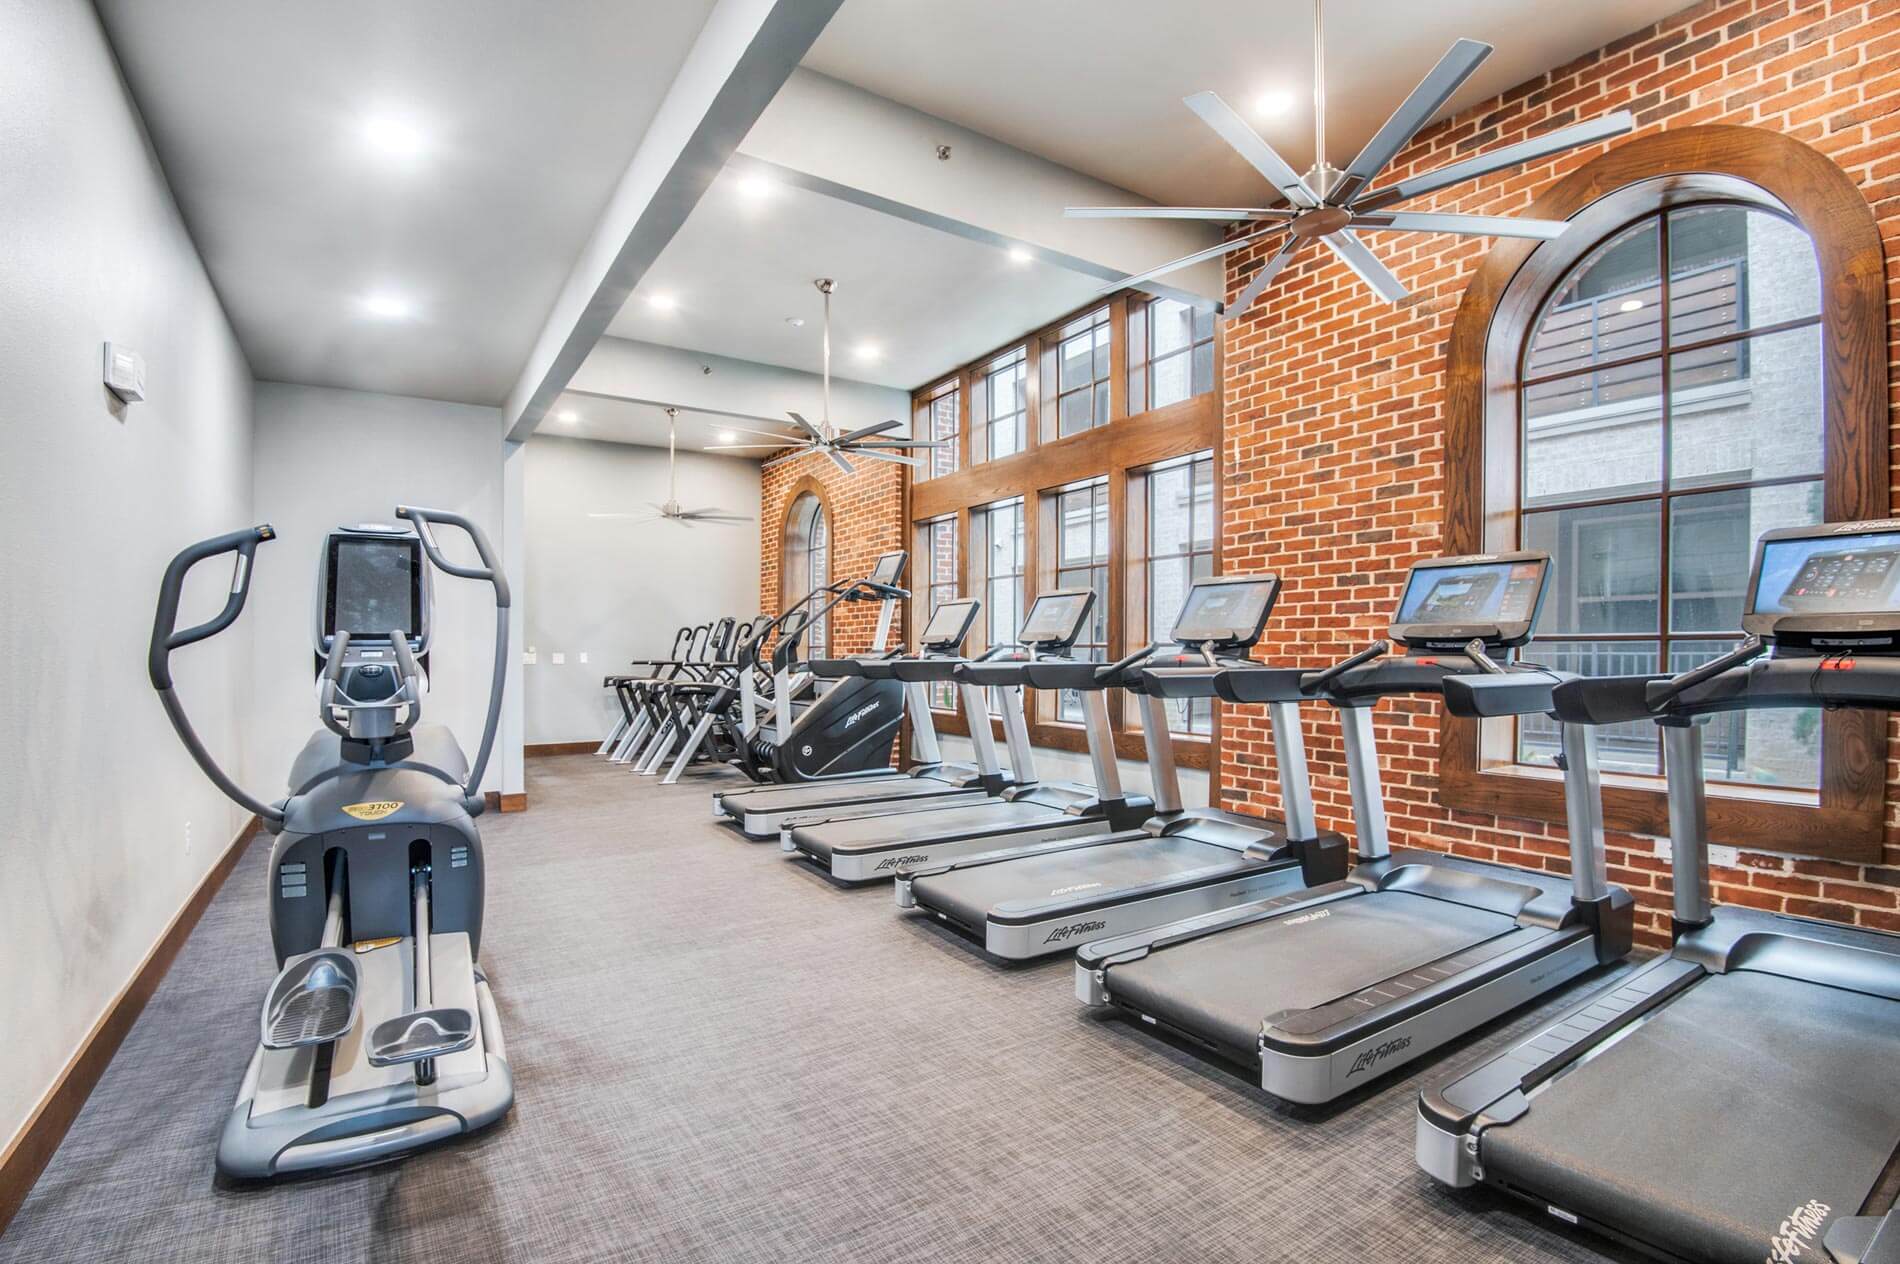 The Canal Fitness Center